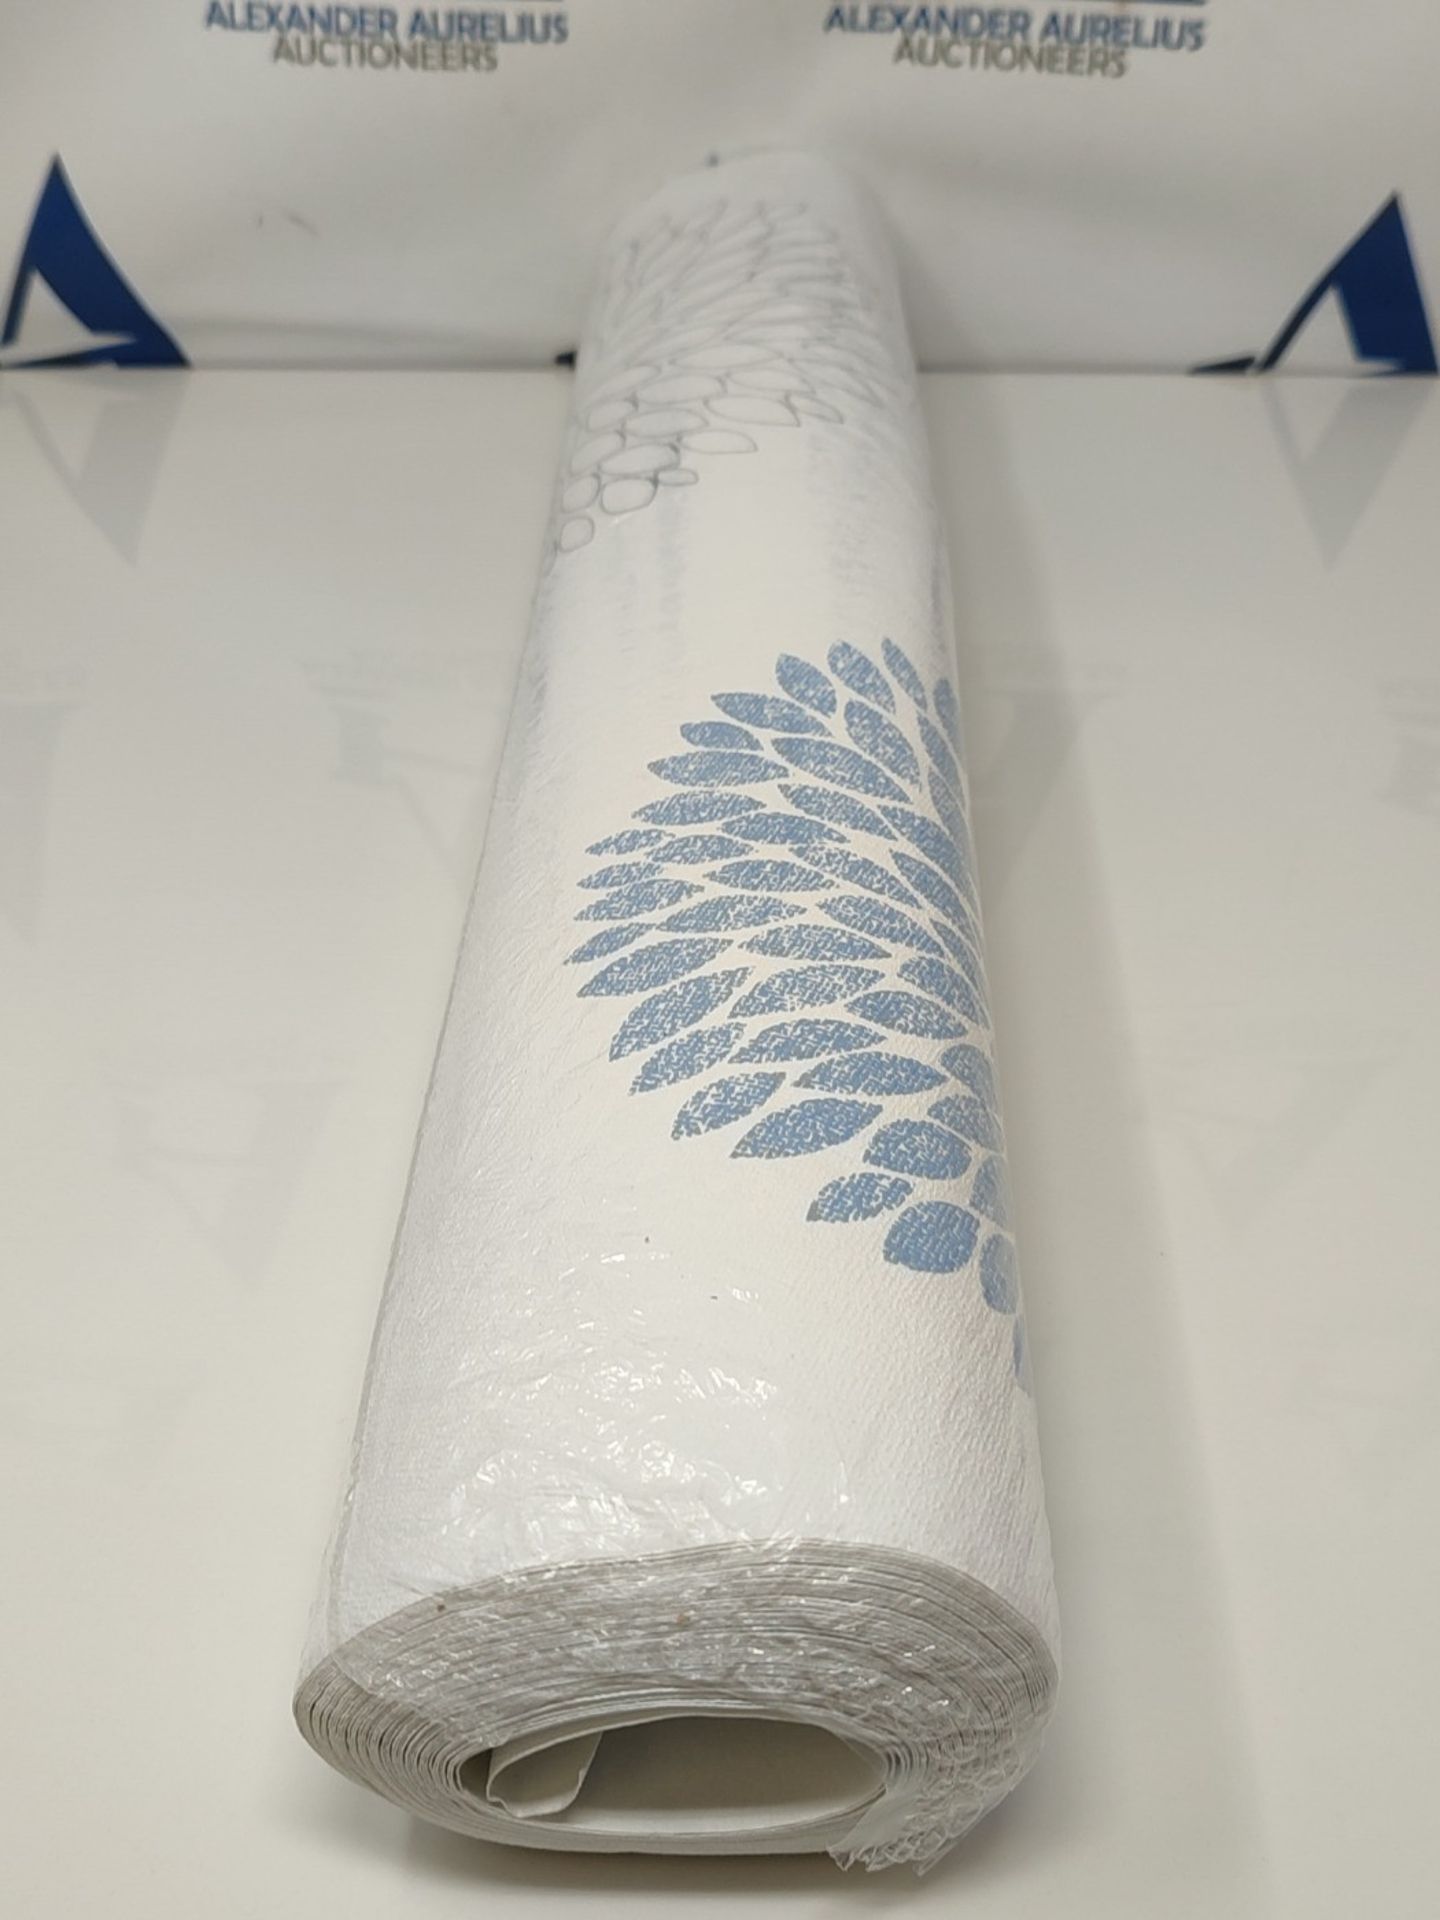 Floral Wallpaper Blooming Non-Woven Wallpaper 10.05 m x 0.53 m Blue Grey White Made in - Image 2 of 2